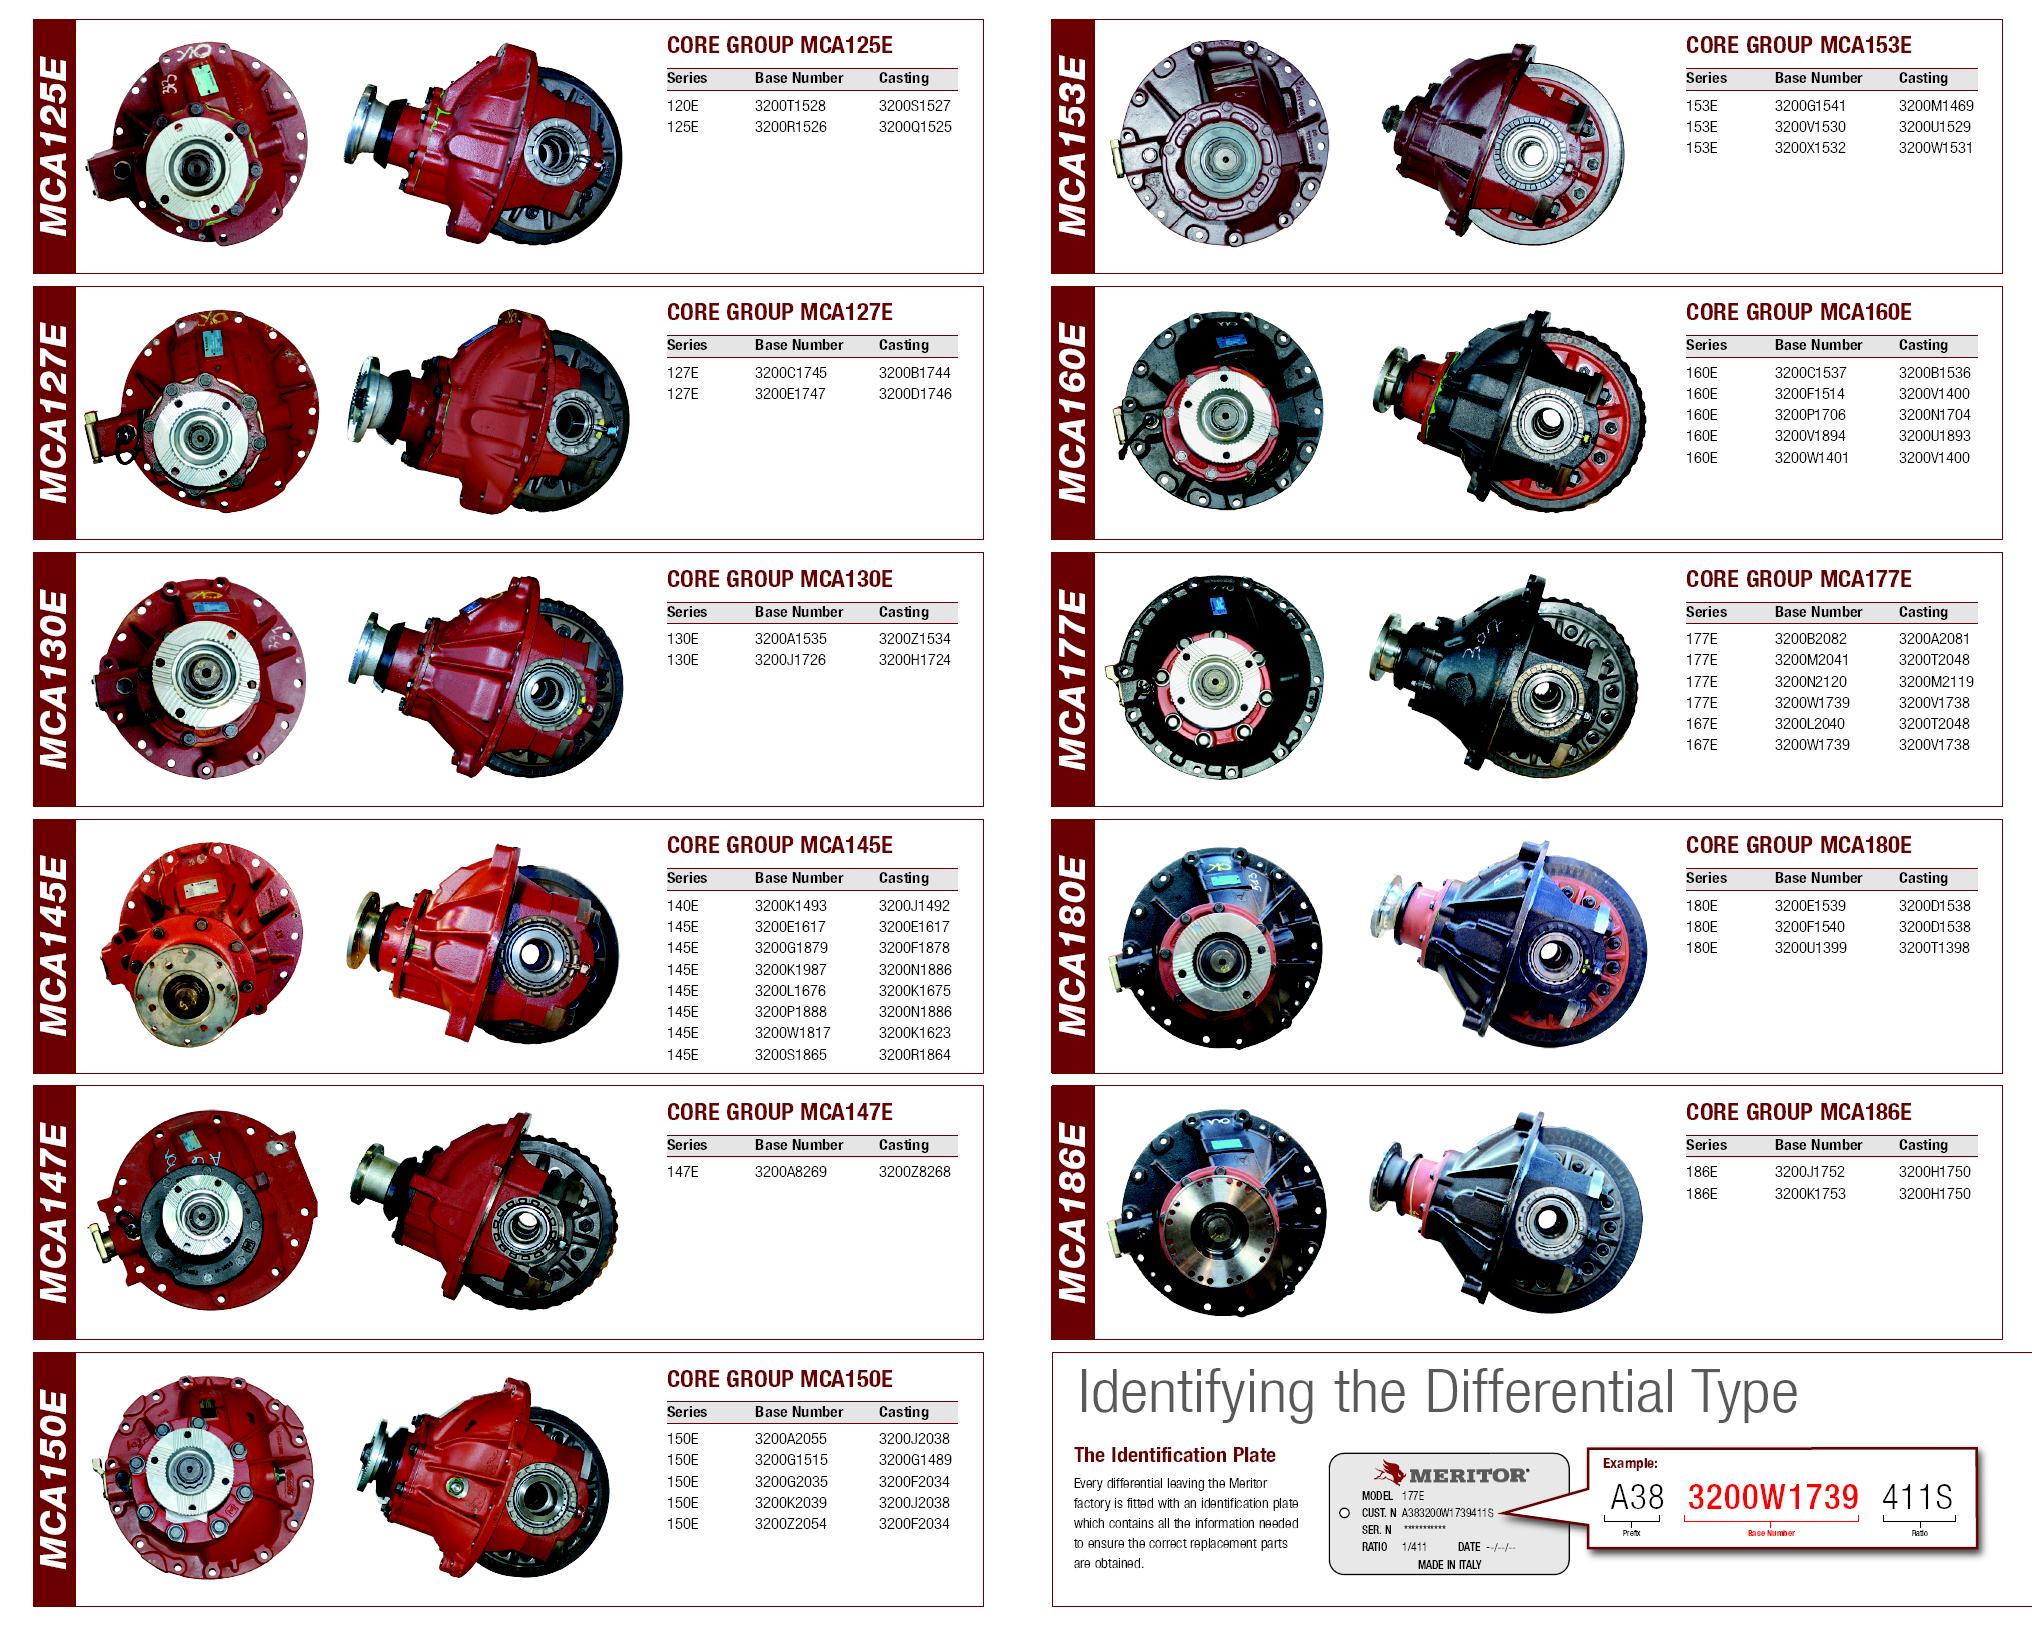 Meritor Differentials Delivered Worldwide From The USA. Meritor Truck